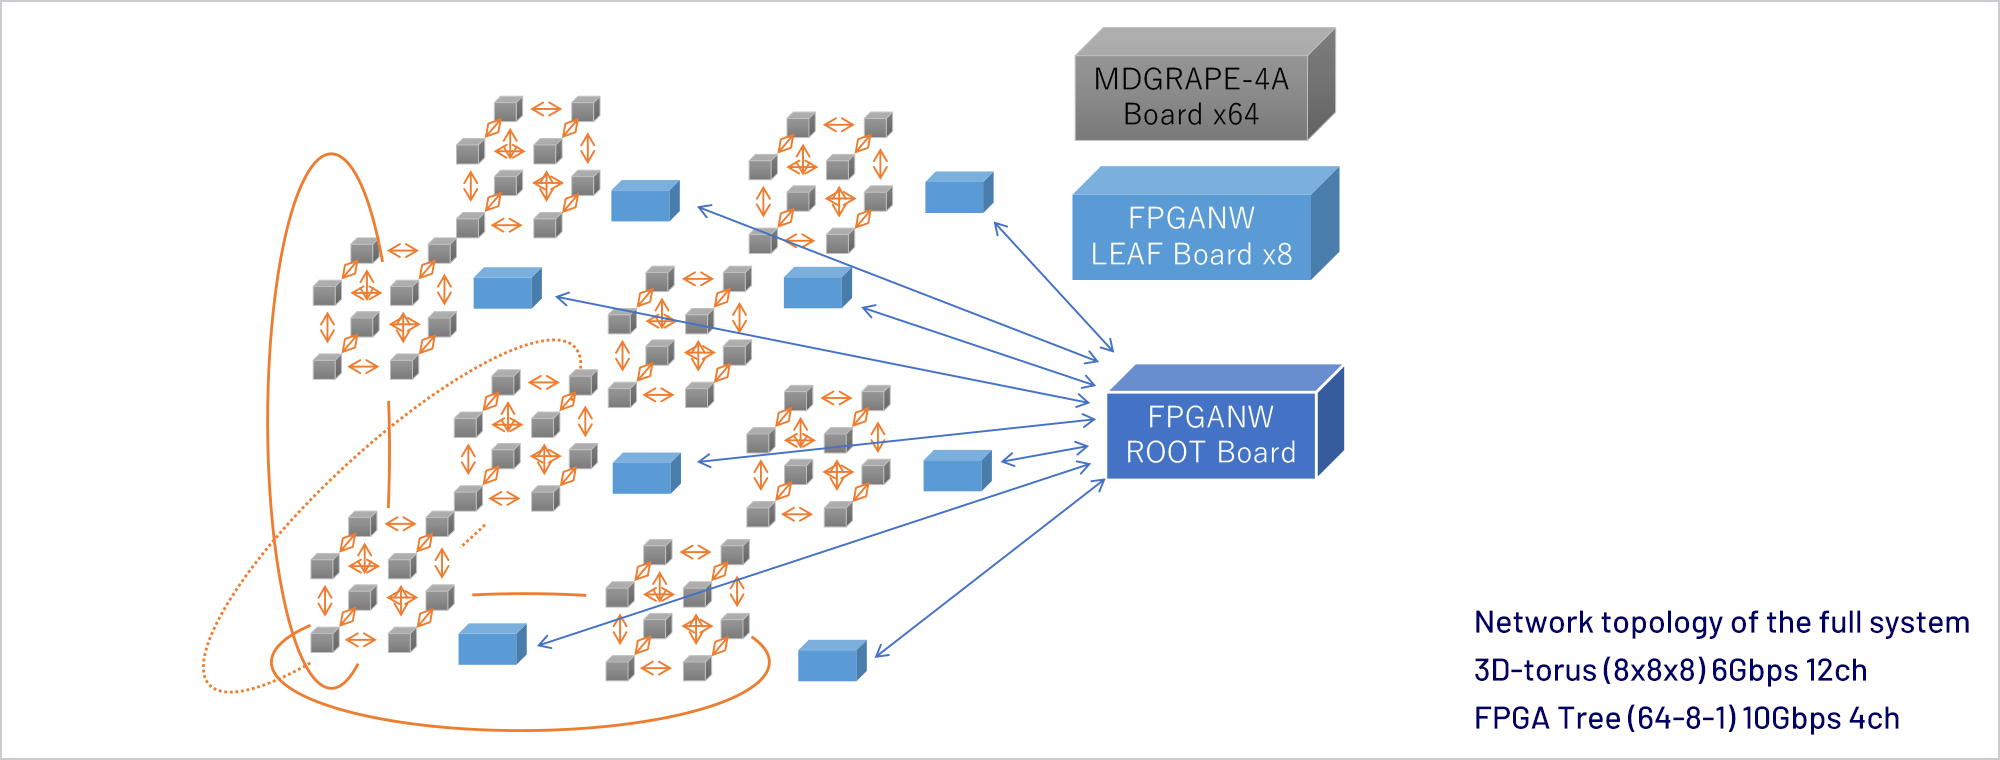 Network topology of the full system